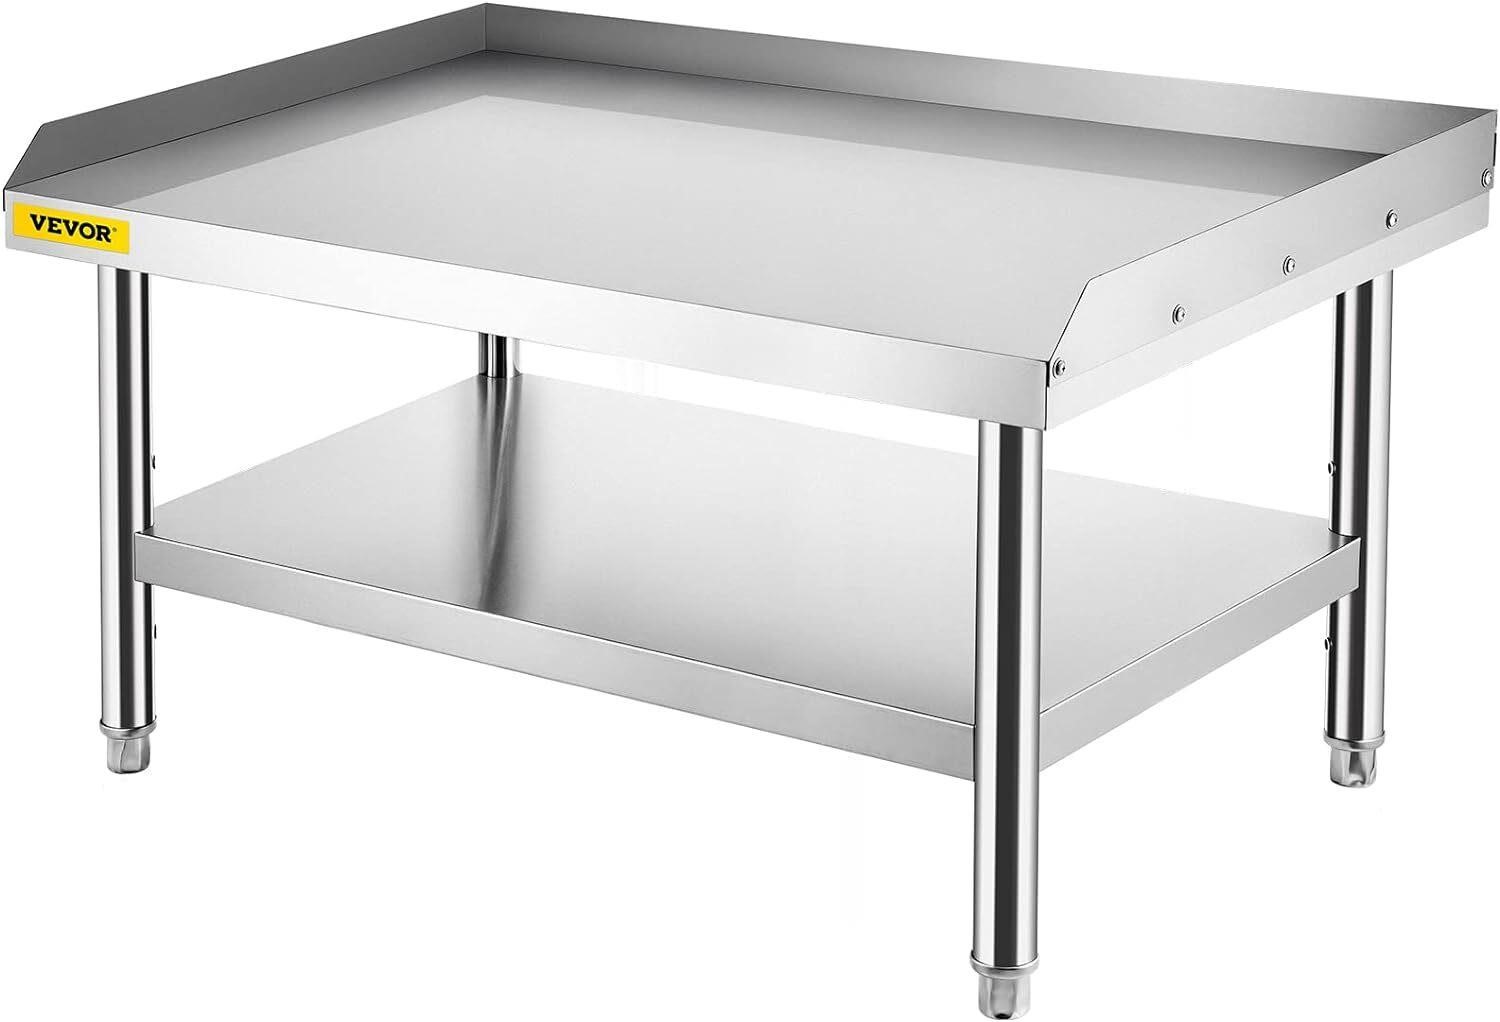 VEVOR Grill Stand  48 x 30 x 24 Inches